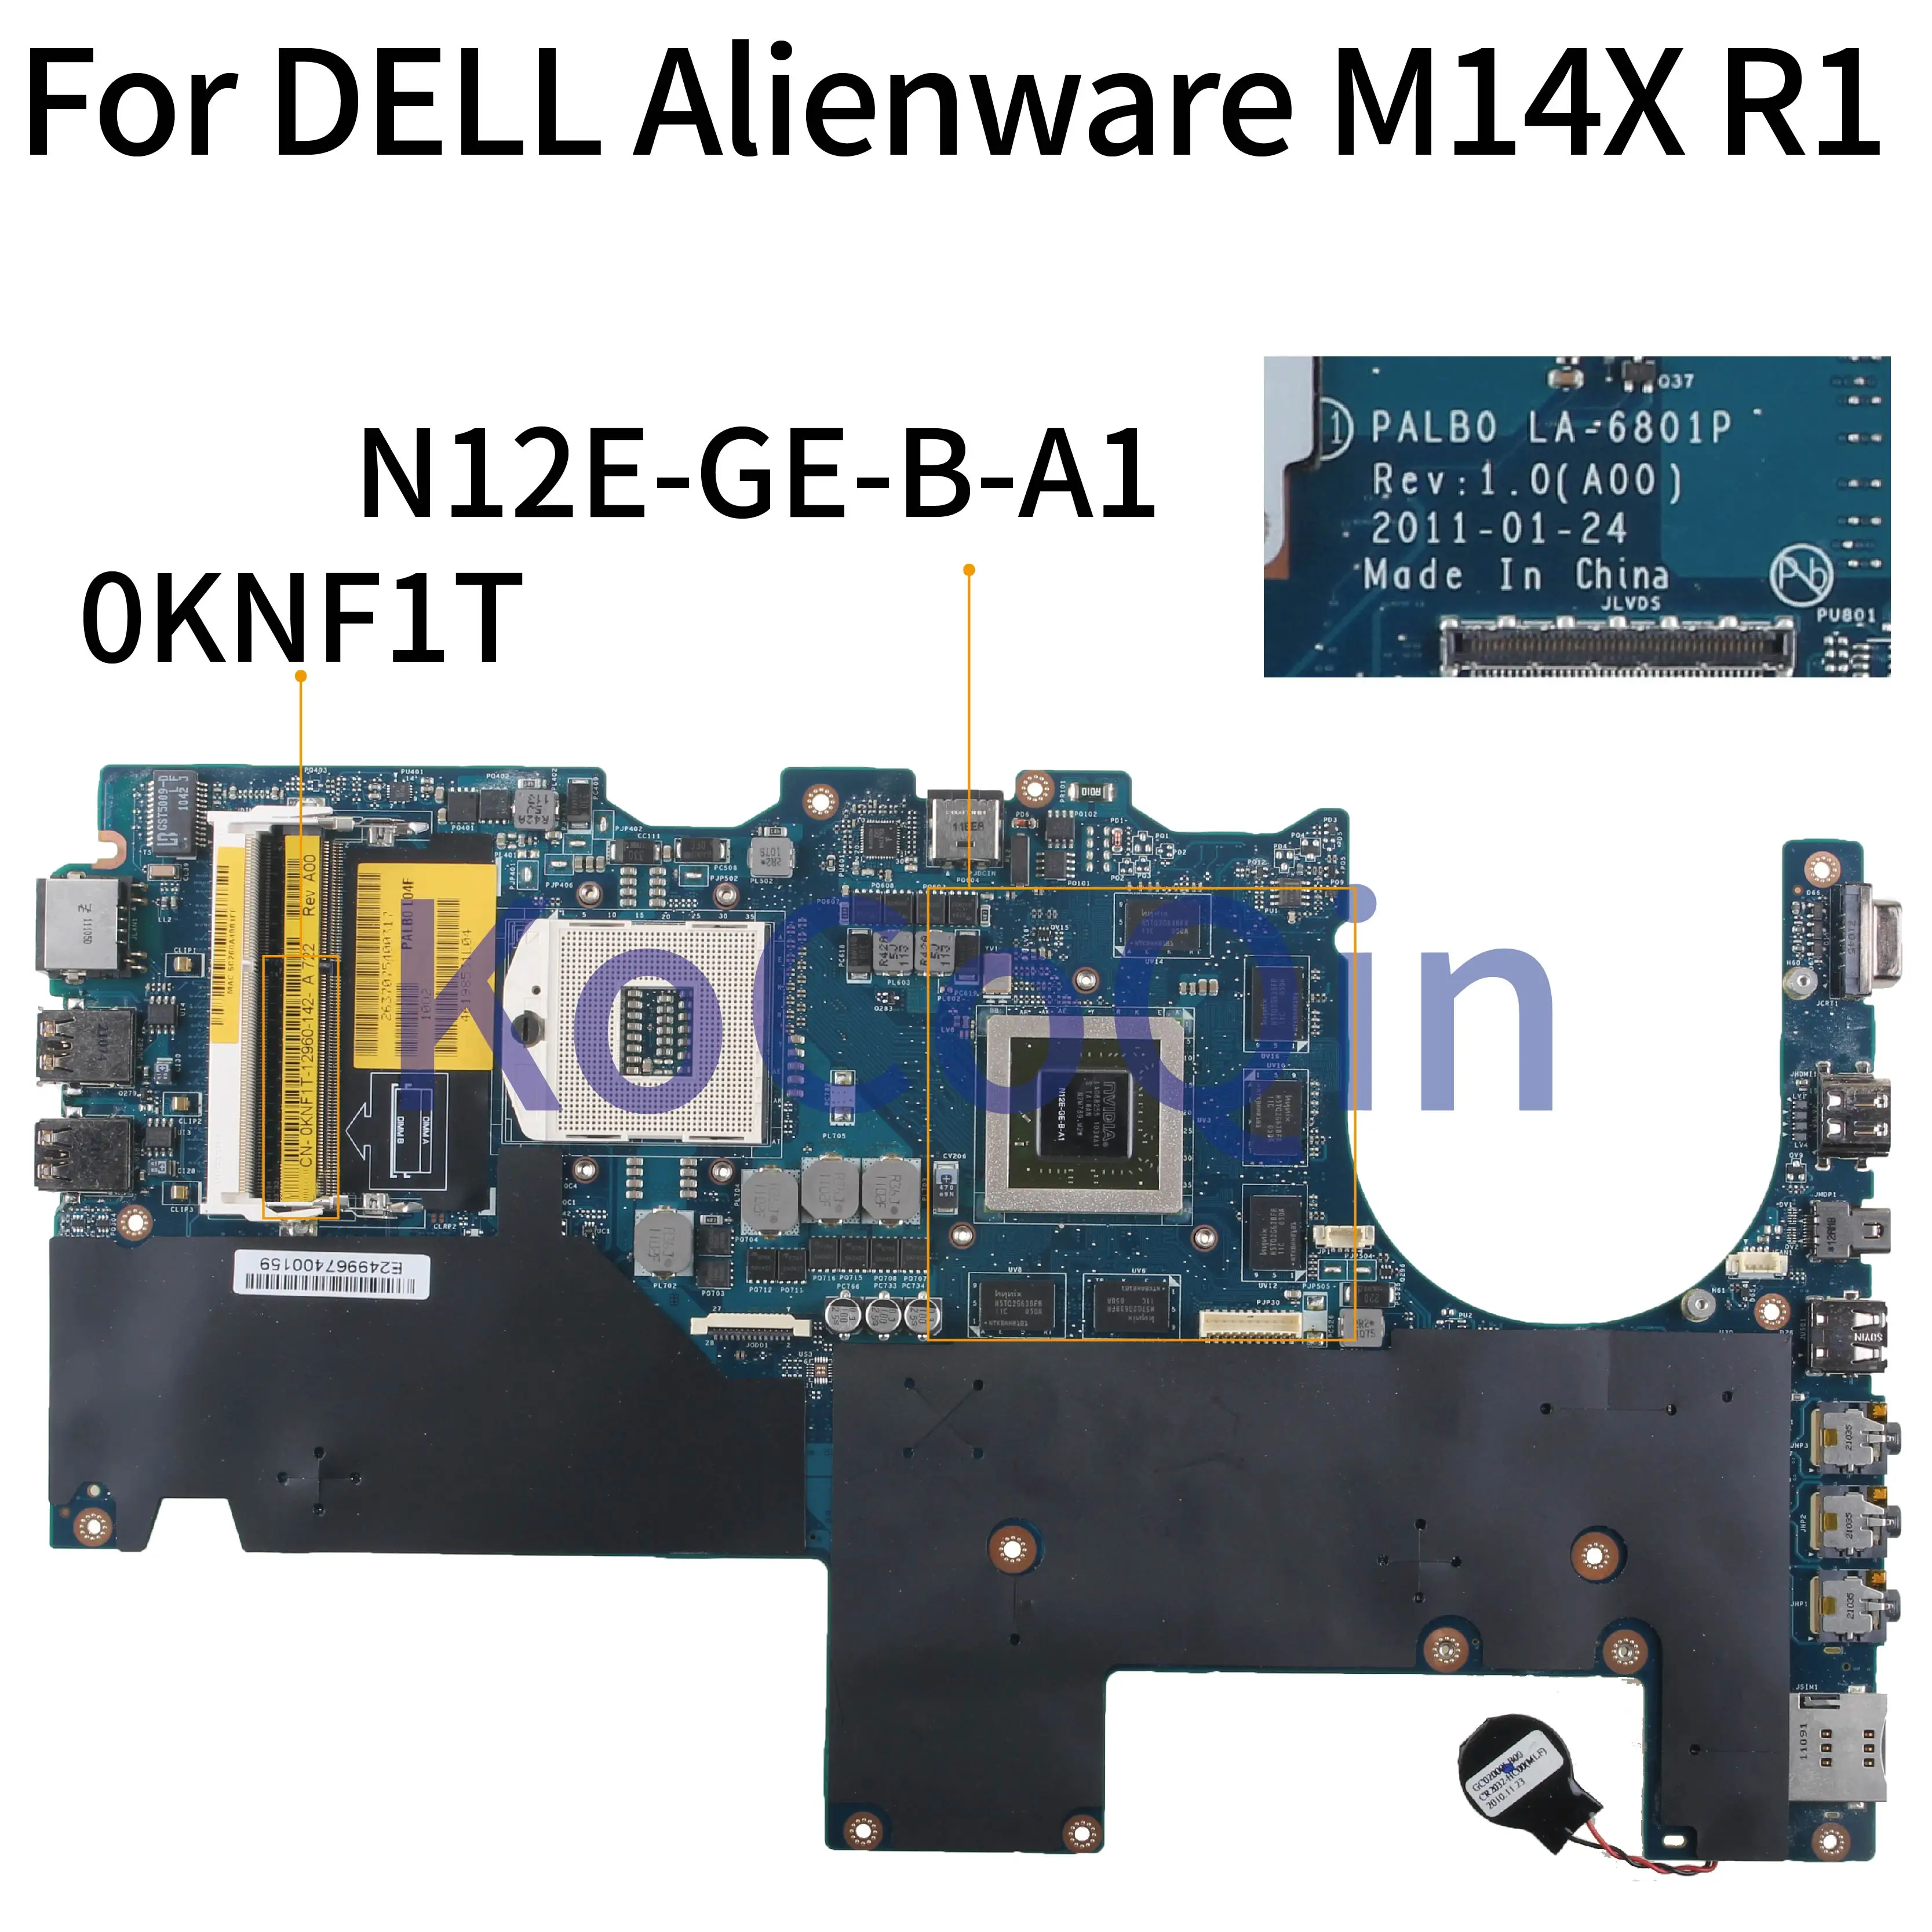 KoCoQin Laptop motherboard For DELL Alienware M14X R1 HM67 Mainboard CN-0KNF1T 0KNF1T PALB0 LA-6801P N12E-GE-B-A1